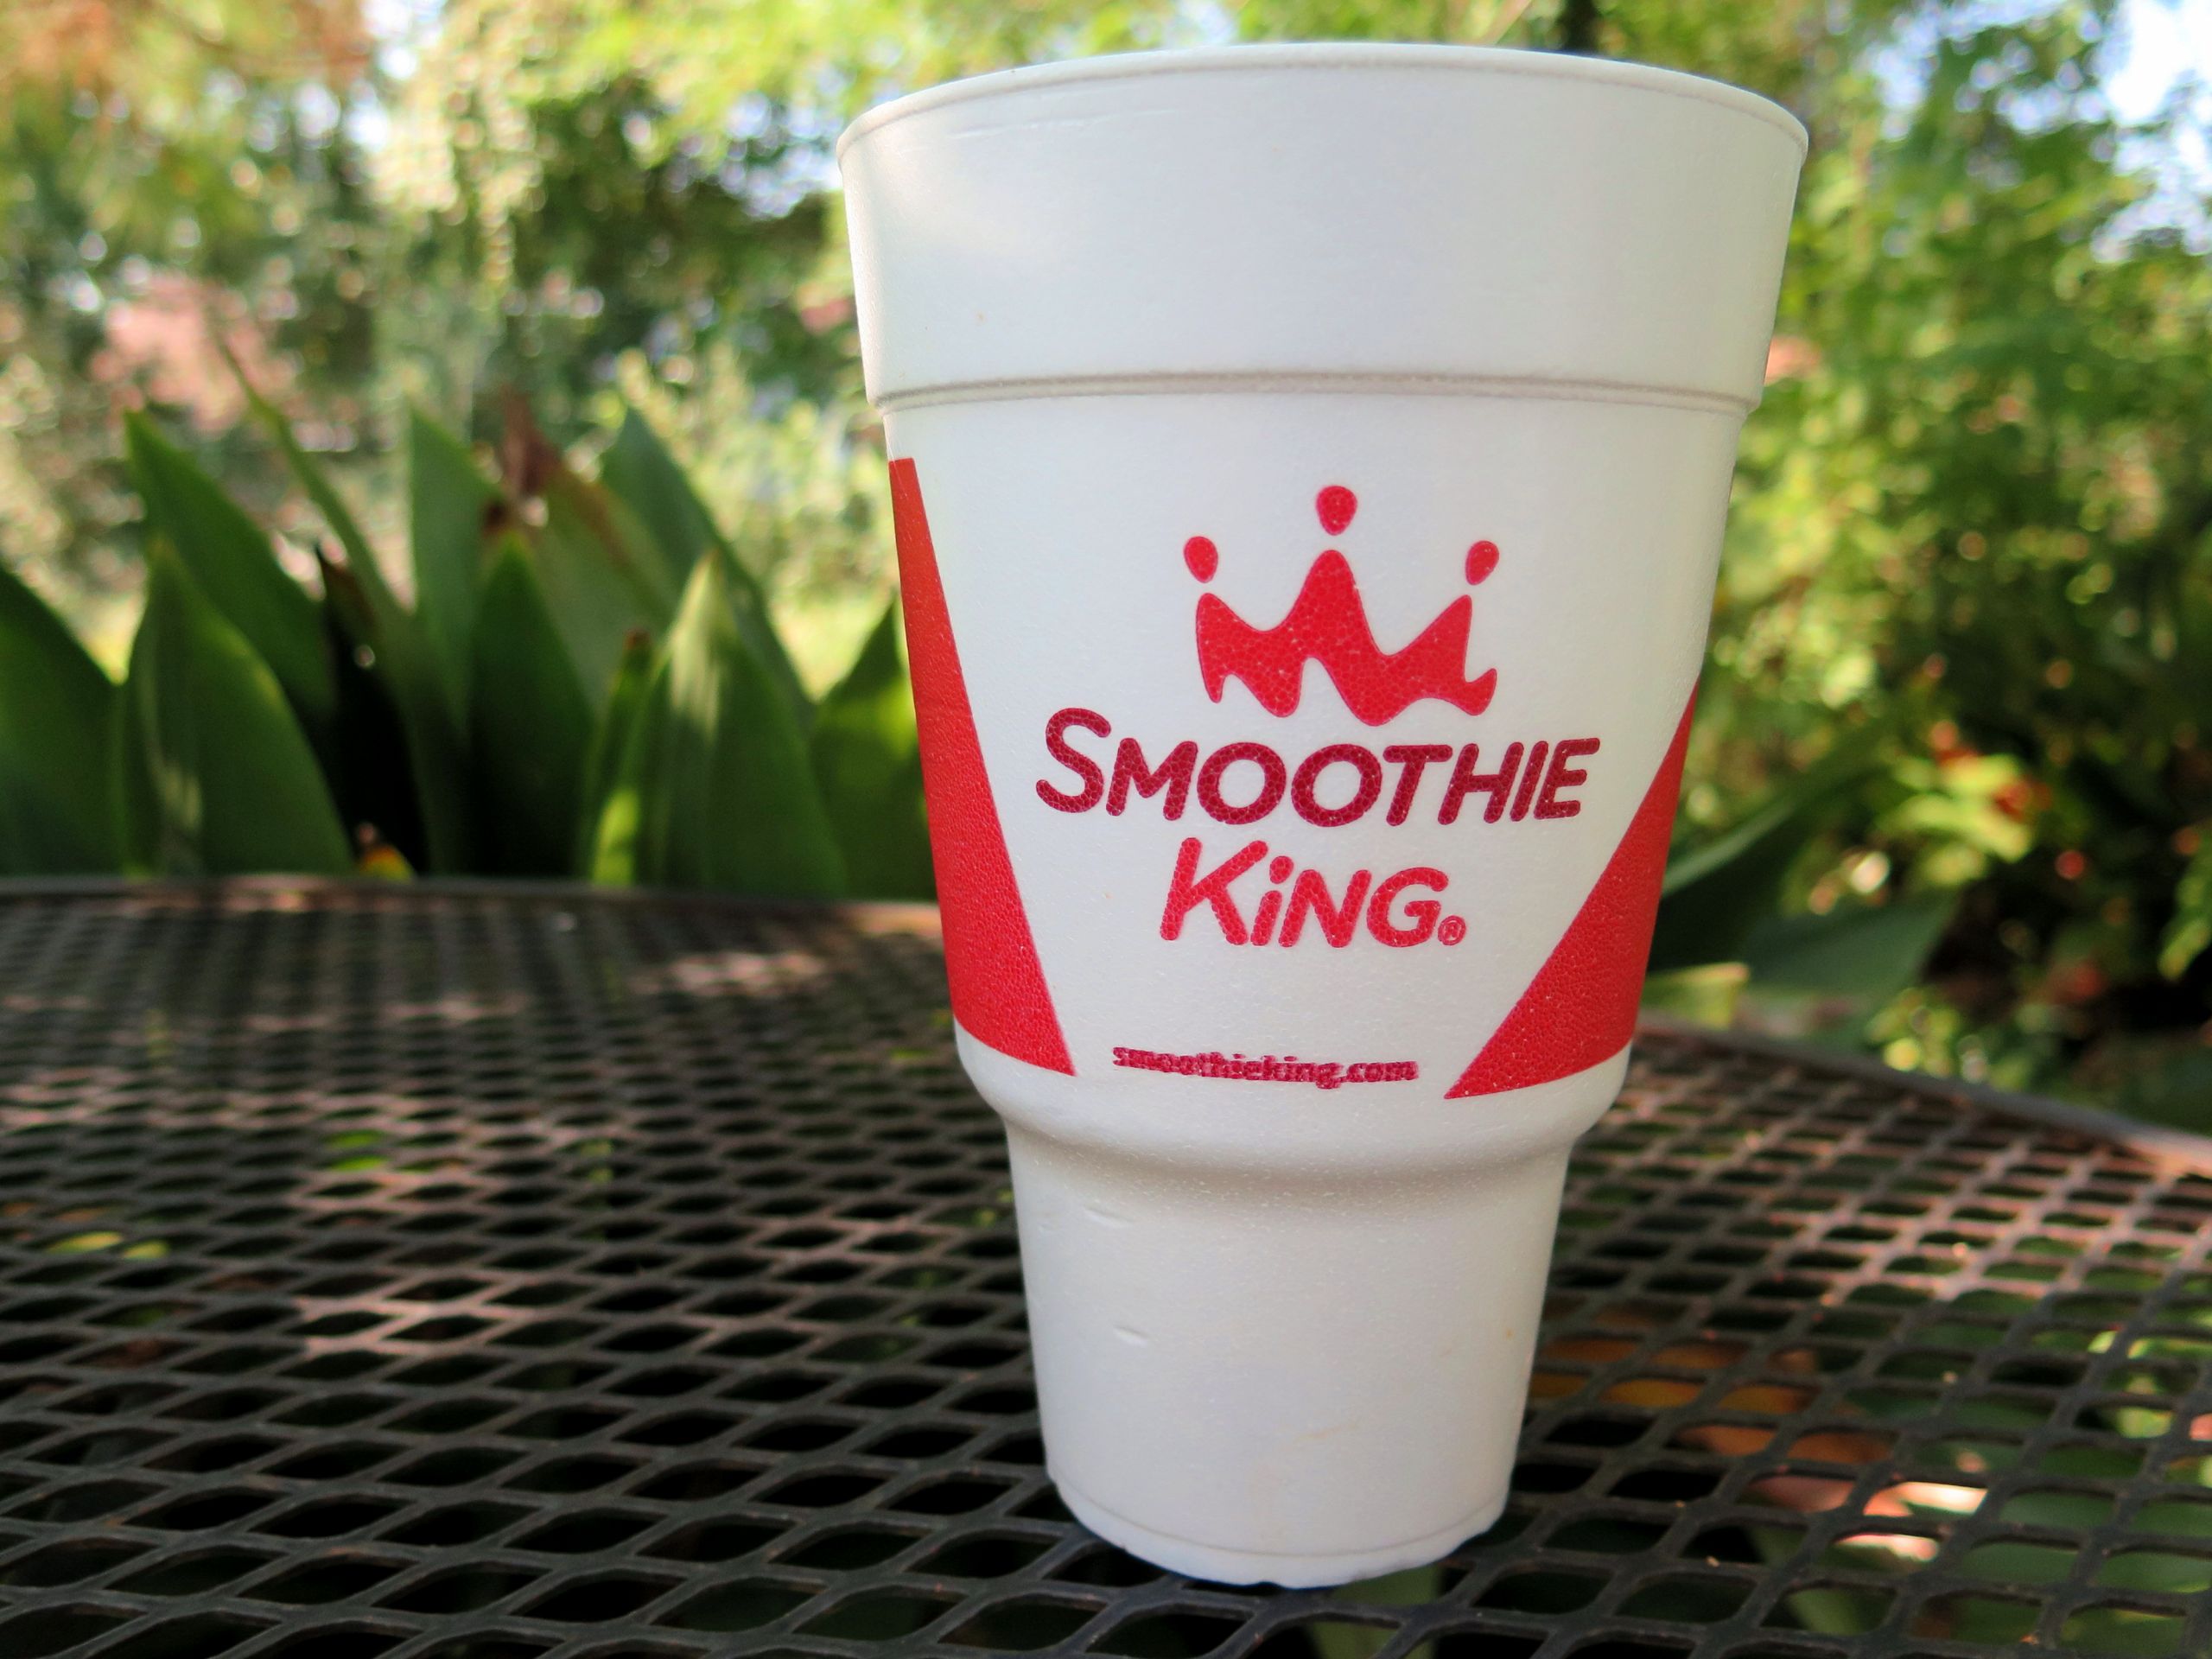 Healthy Smoothies At Smoothie King
 Summer Coffee and Fruit Yogurt Smoothies